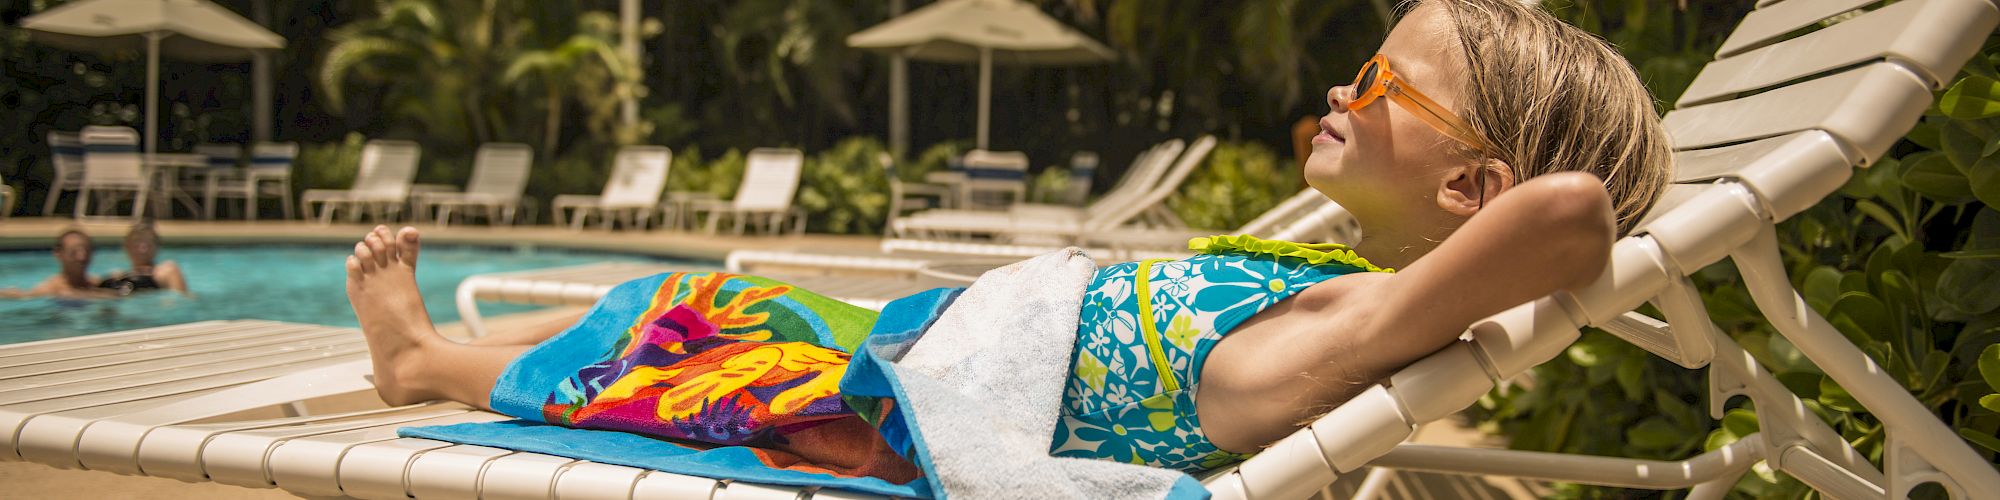 A child is lounging on a poolside chair, wrapped in a colorful towel, wearing sunglasses, near a pool with people and greenery around.